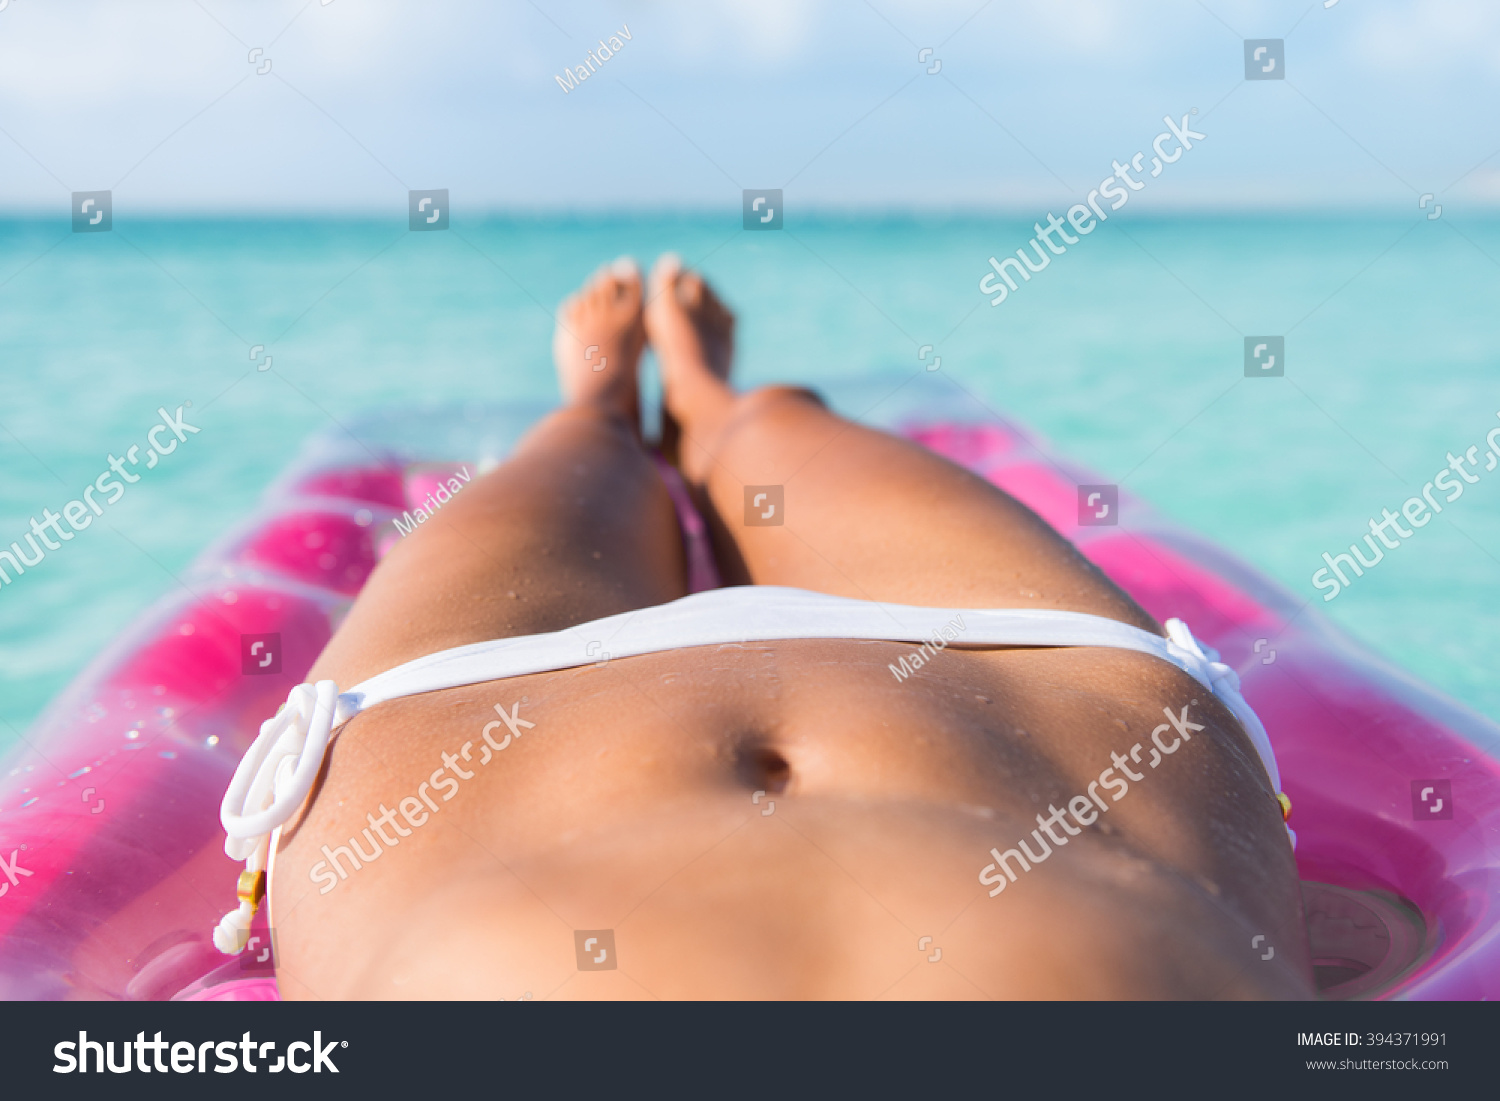 Sexy Bikini Body Abs Stomach Closeup And Tanned Legs Of Beach Woman Relaxing Tanning On Air